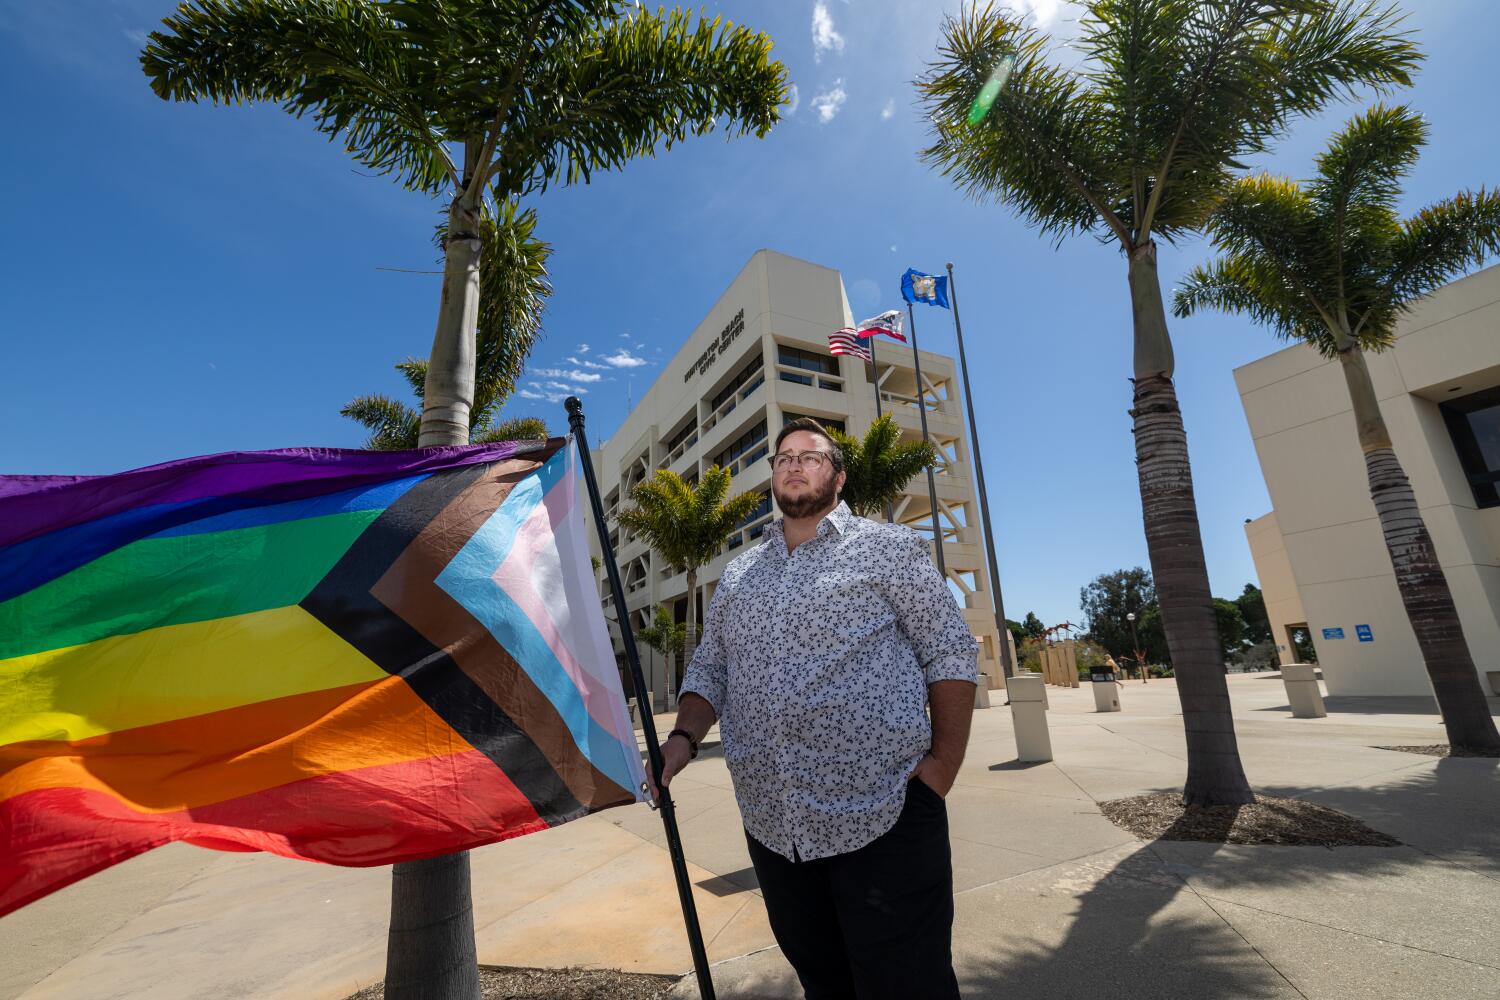 lgbtq+-people-in-huntington-beach-fearful-of-what-they-say-is-a-rise-in-hostility